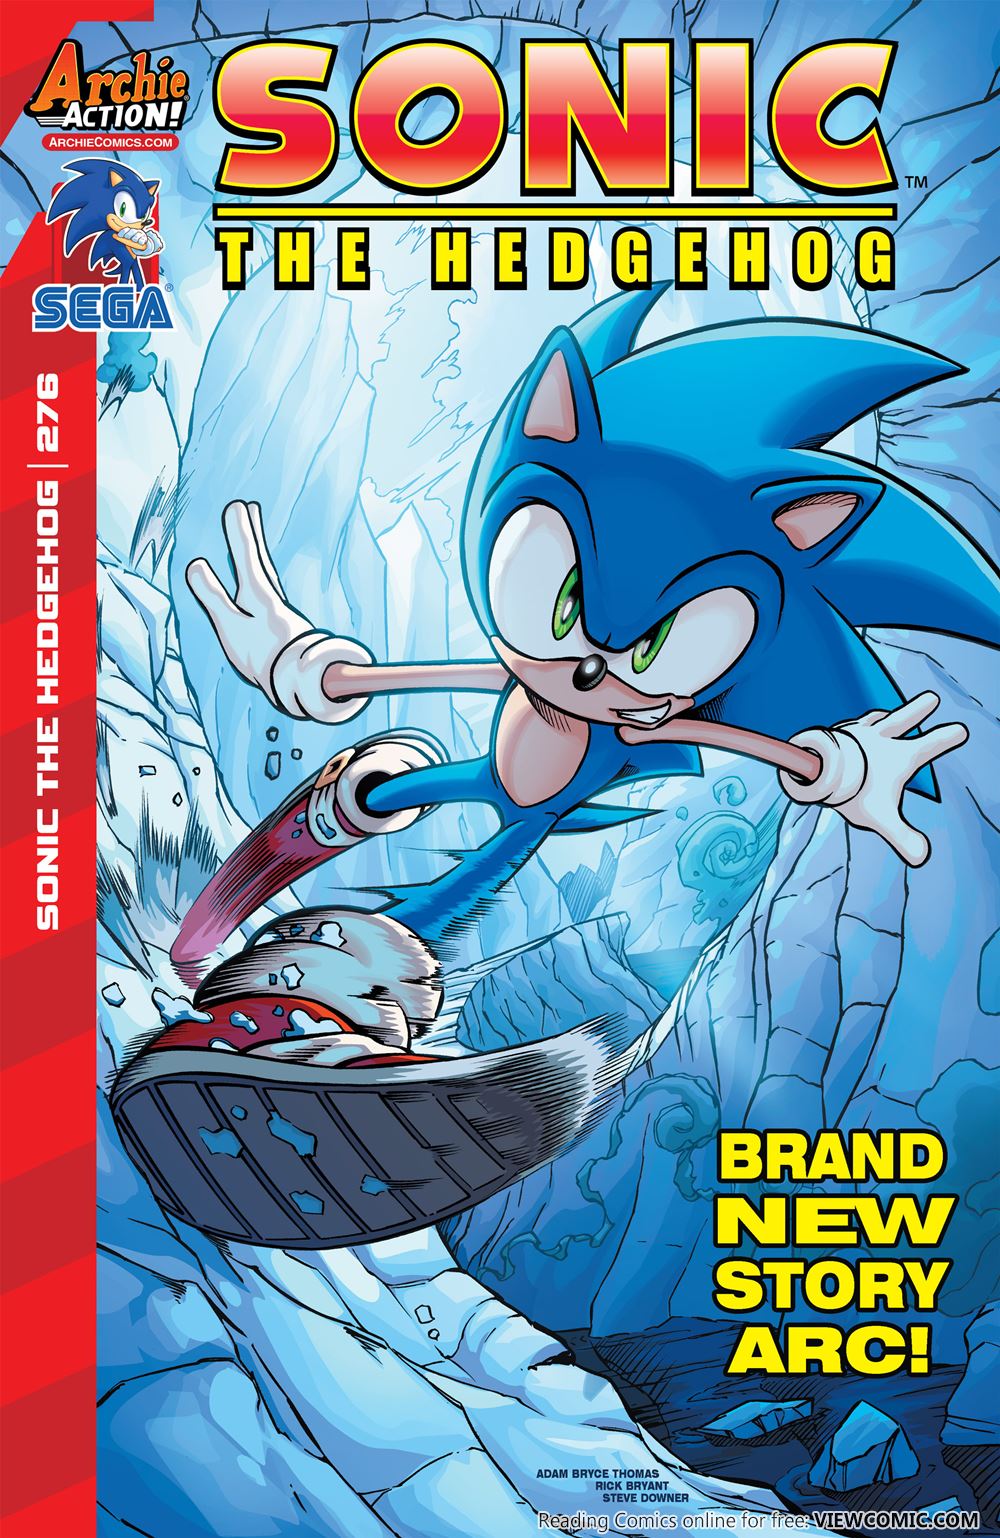 Sonic The Hedgehog 276 2015 | Read Sonic The Hedgehog 276 2015 comic online  in high quality. Read Full Comic online for free - Read comics online in  high quality .|viewcomiconline.com